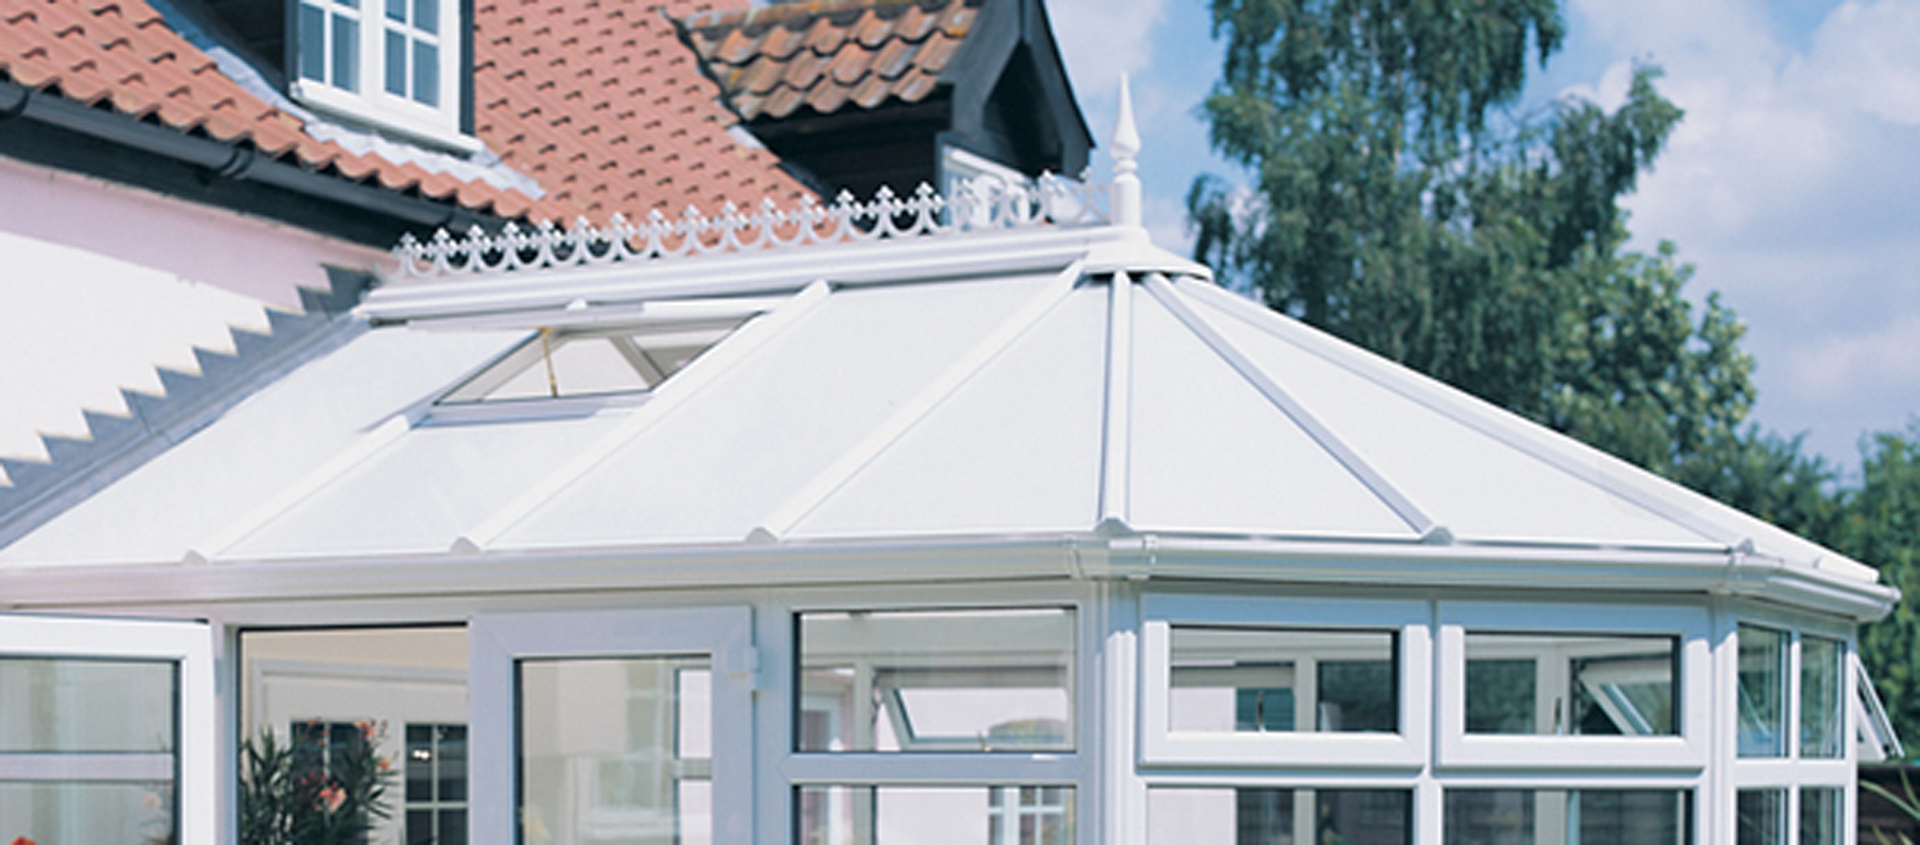 Polycarbonate Roof Conservatory